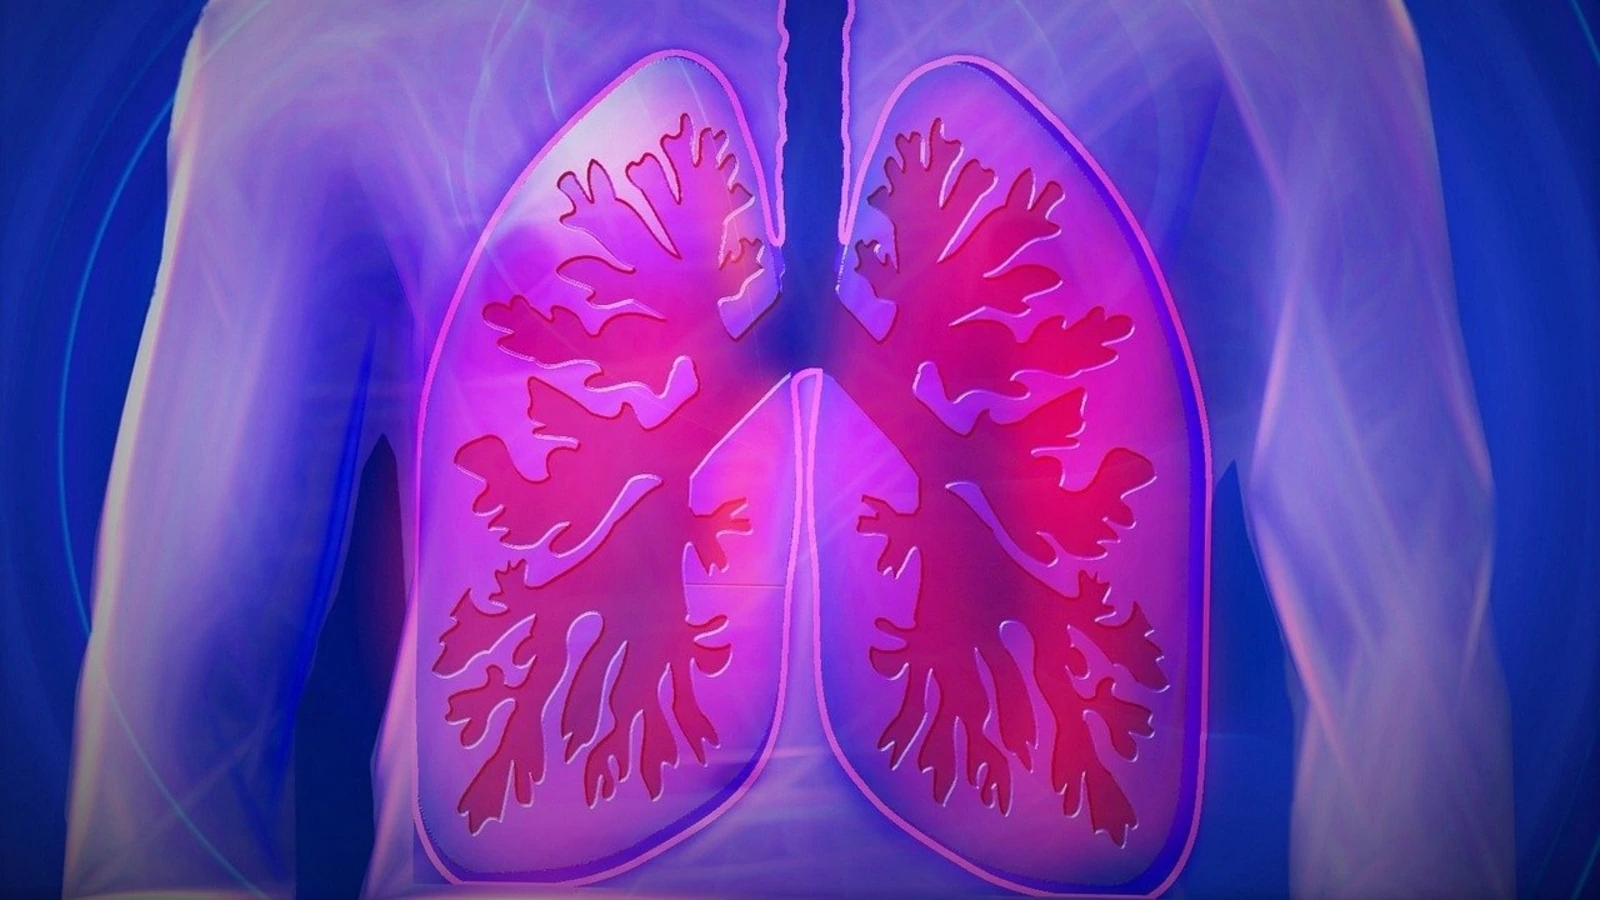 Wellhealthorganic.com: It is important to pay attention to the health of the lungs